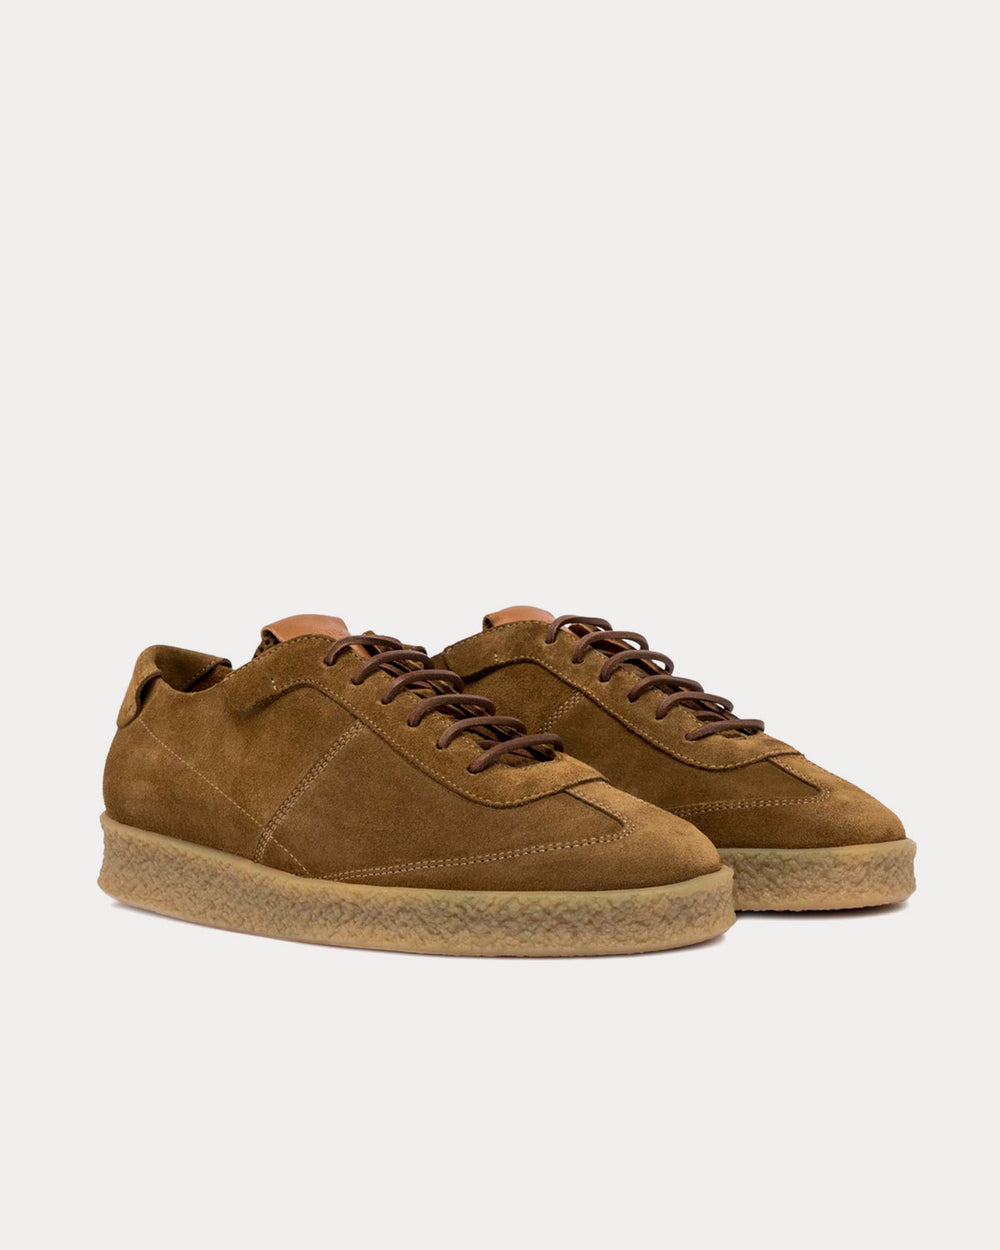 Buttero Crespo Curry Yellow Suede Low Top Sneakers - Sneak in Peace